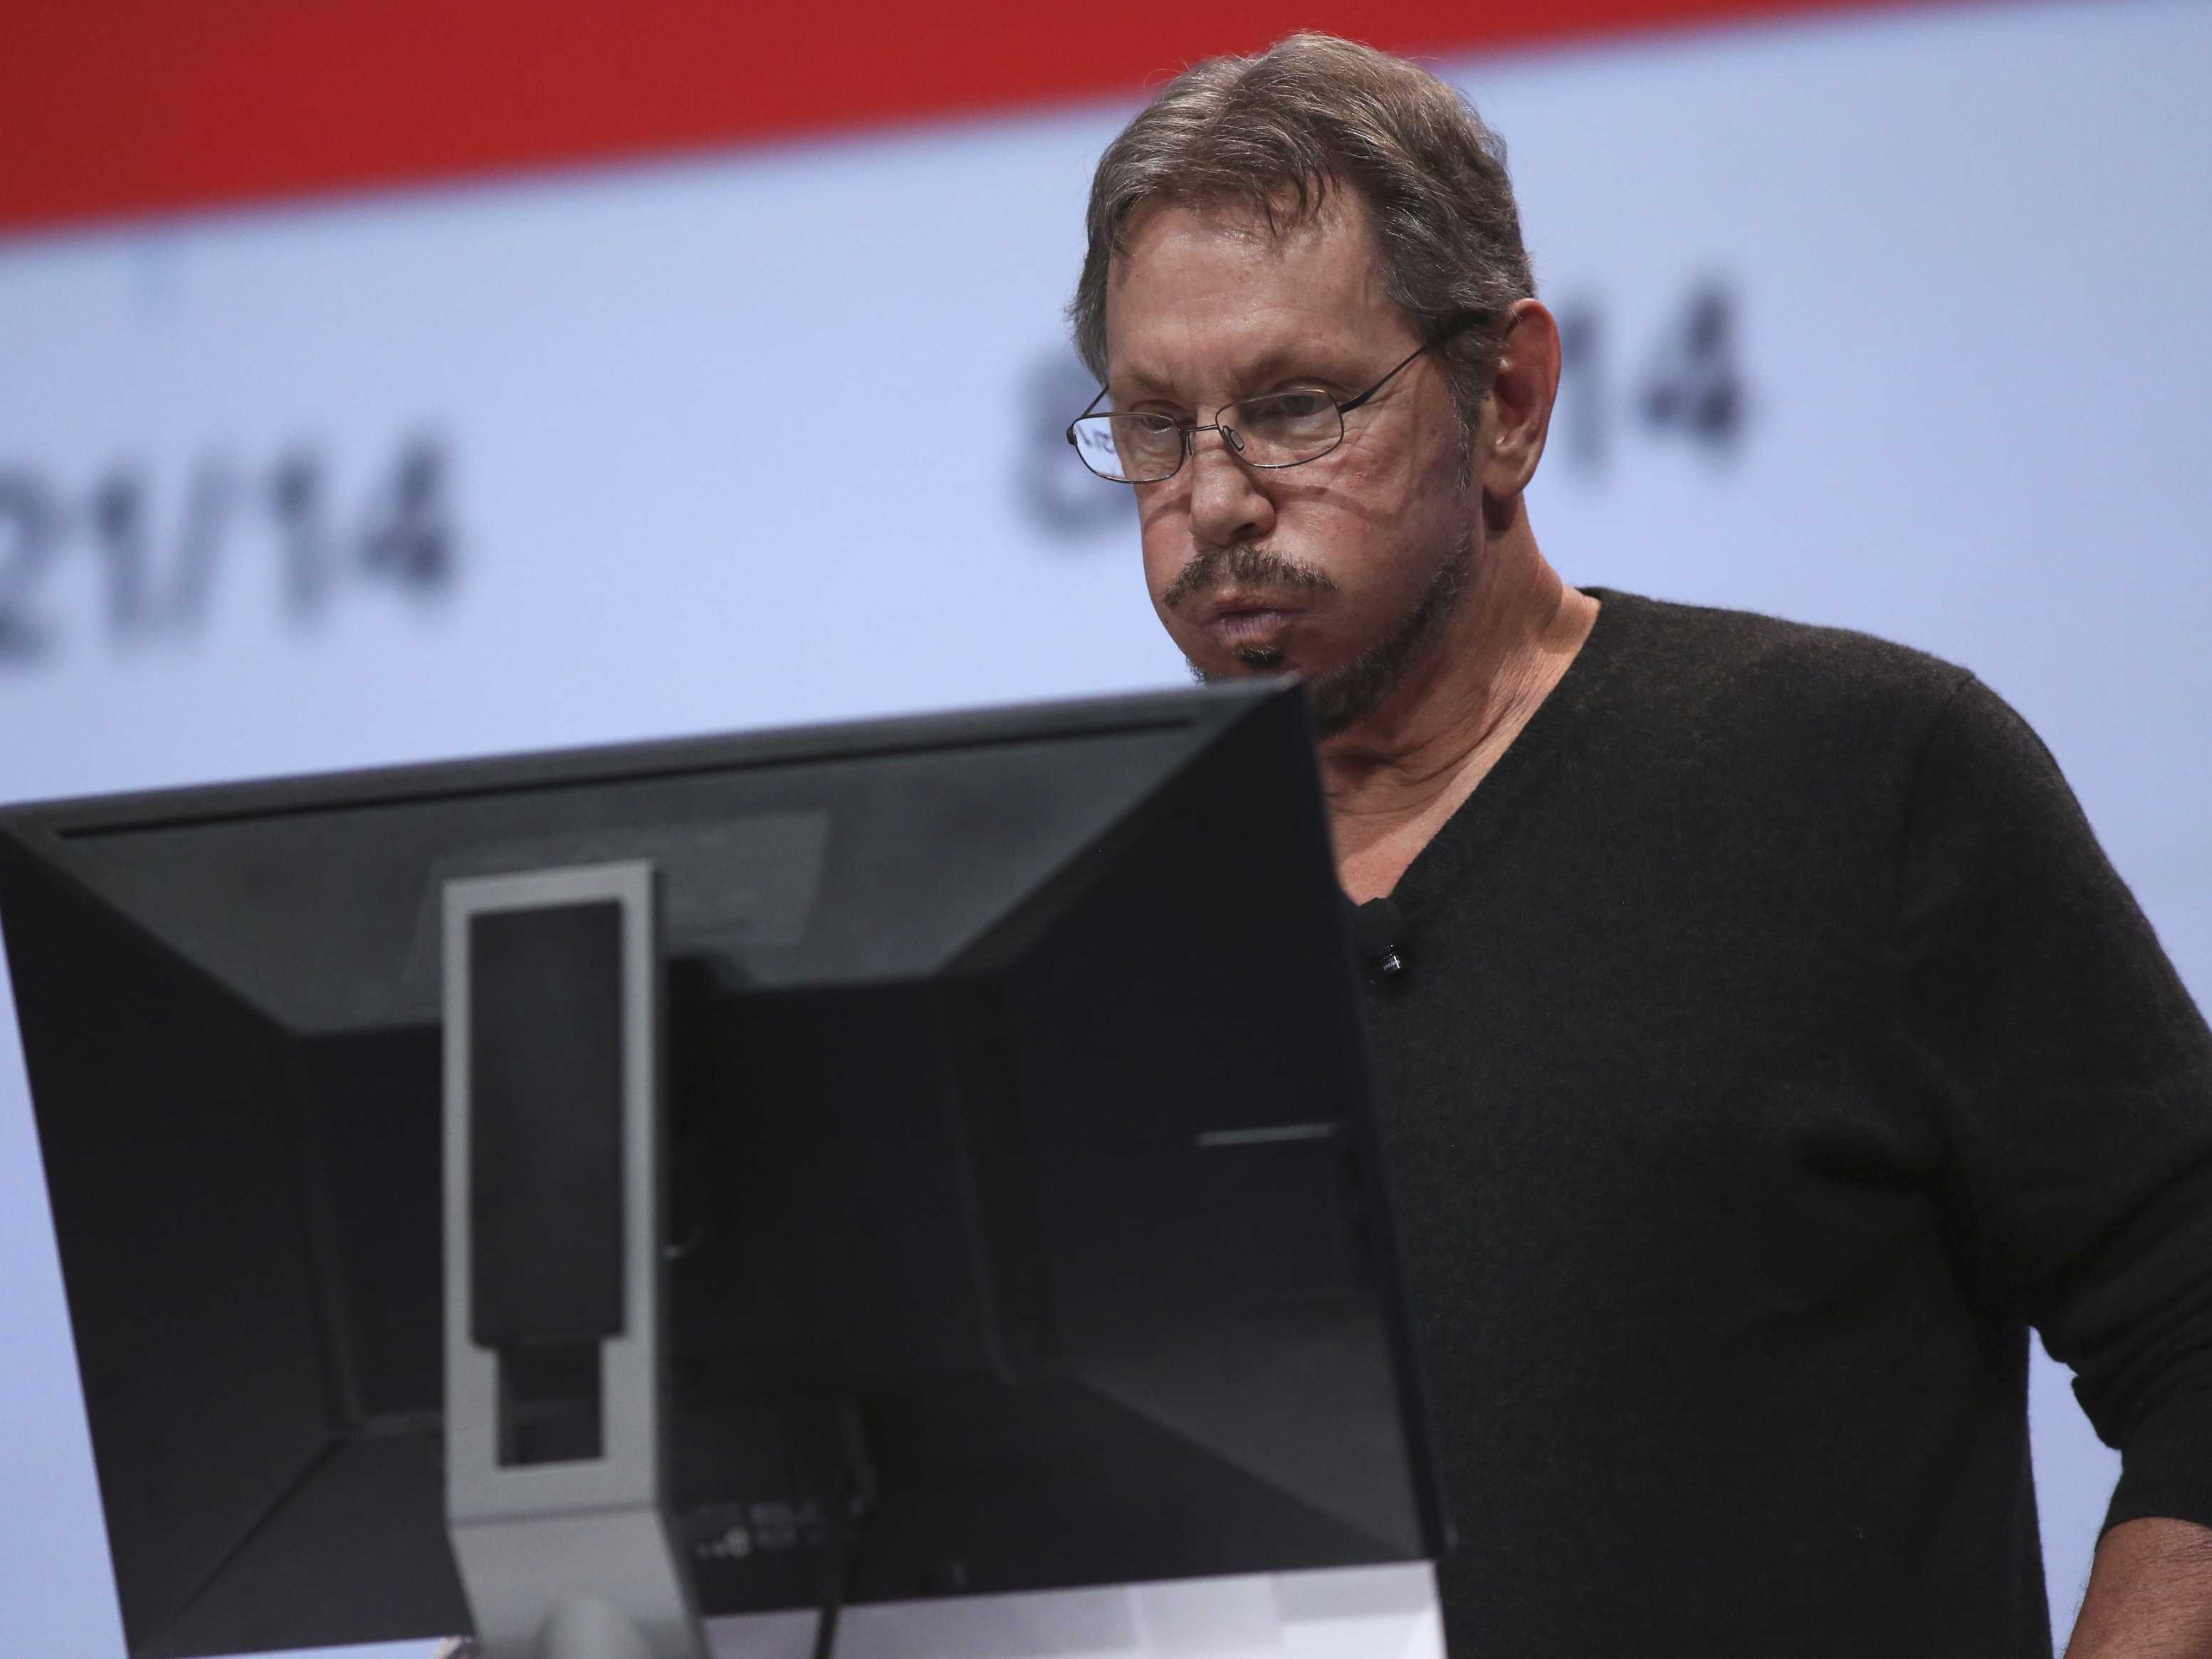 Larry Ellison, Oracle's executive chairman and chief technology officer. Photo: REUTERS/Robert Galbraith